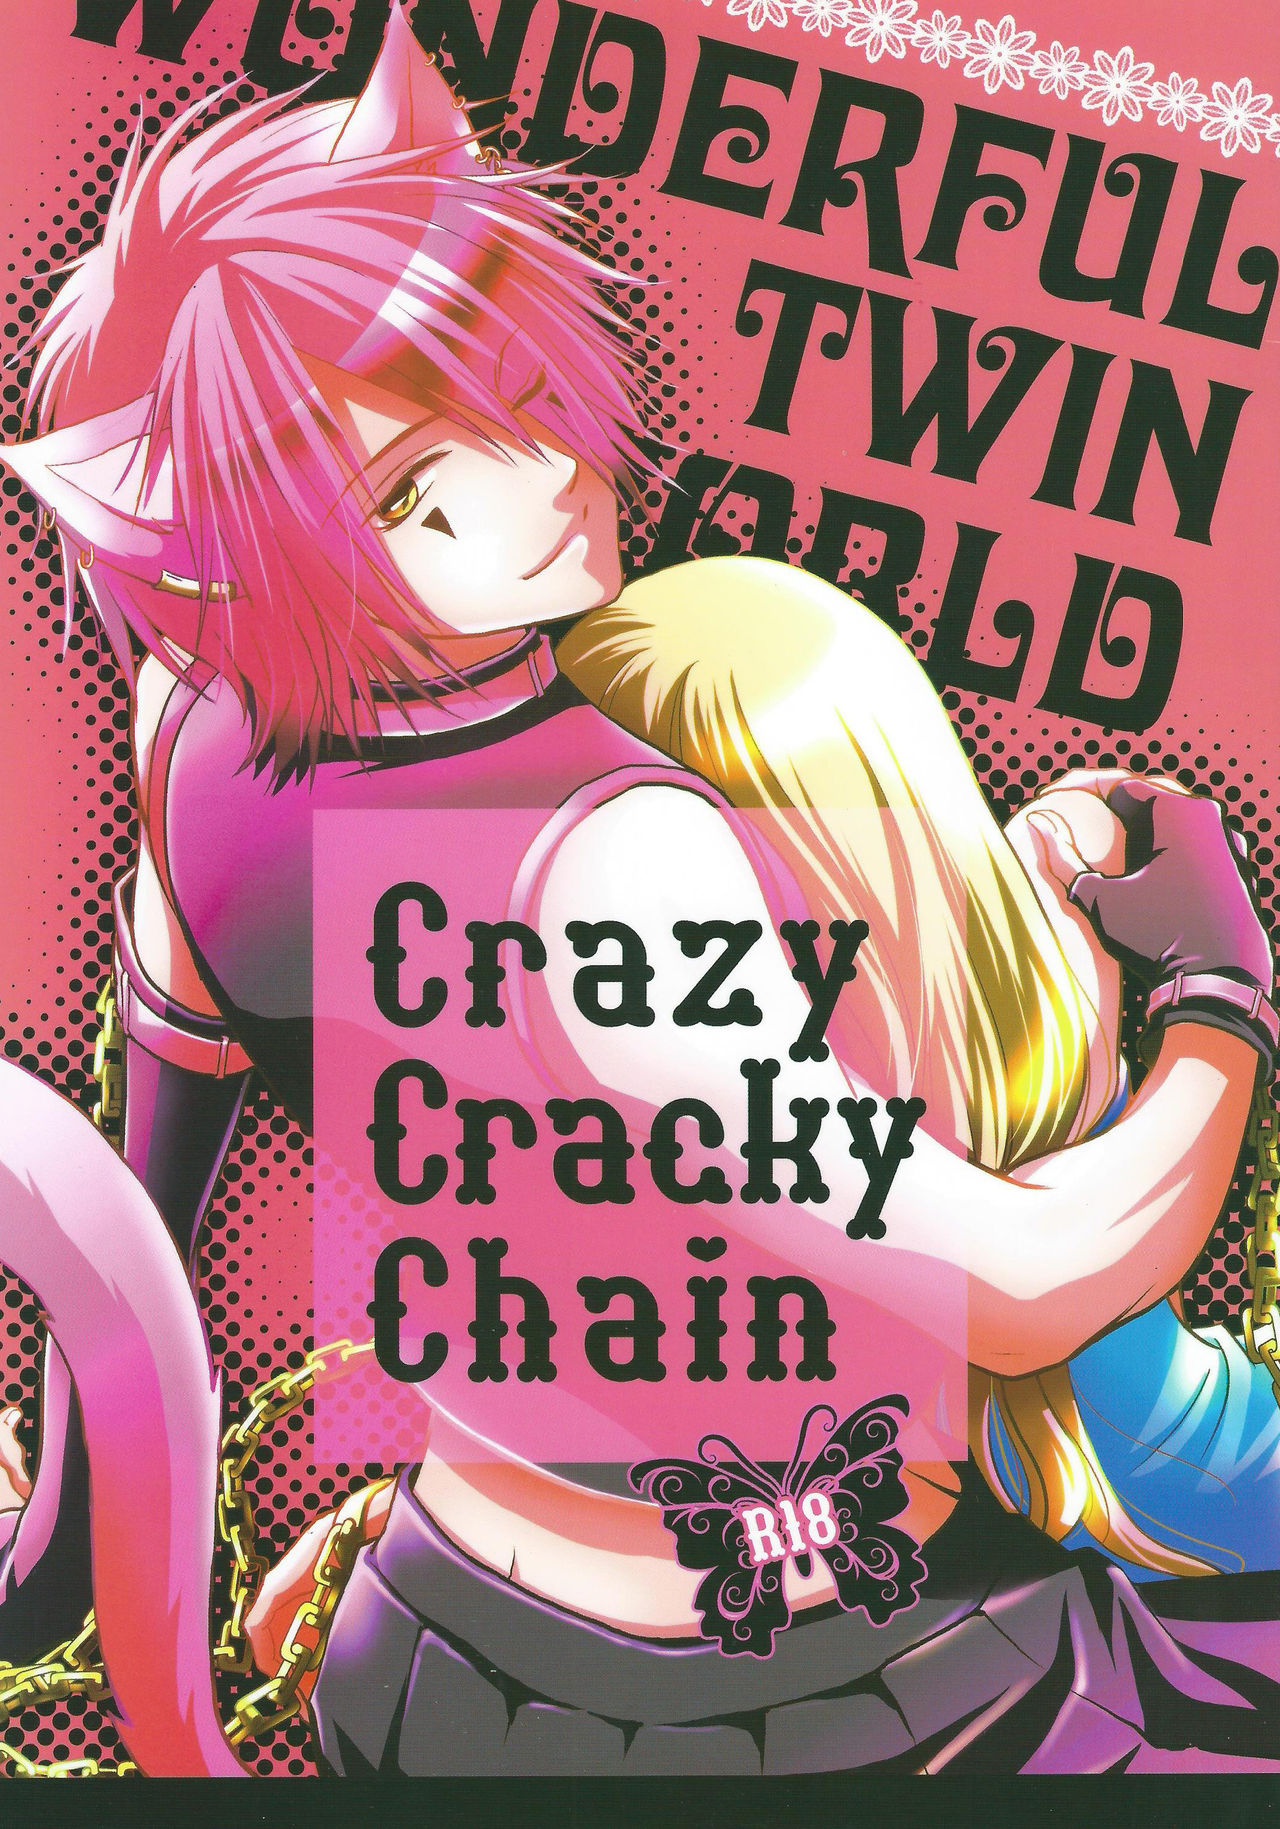 (SPARK9) [tate-A-tate (Elijah)] Crazy Cracky Chain (Alice in the Country of Hearts) [English] [CGrascal] (SPARK9) [tate-A-tate (エリヤ)] Crazy Cracky Chain (ハートの国のアリス ～Wonderful Wonder World～) [英訳]